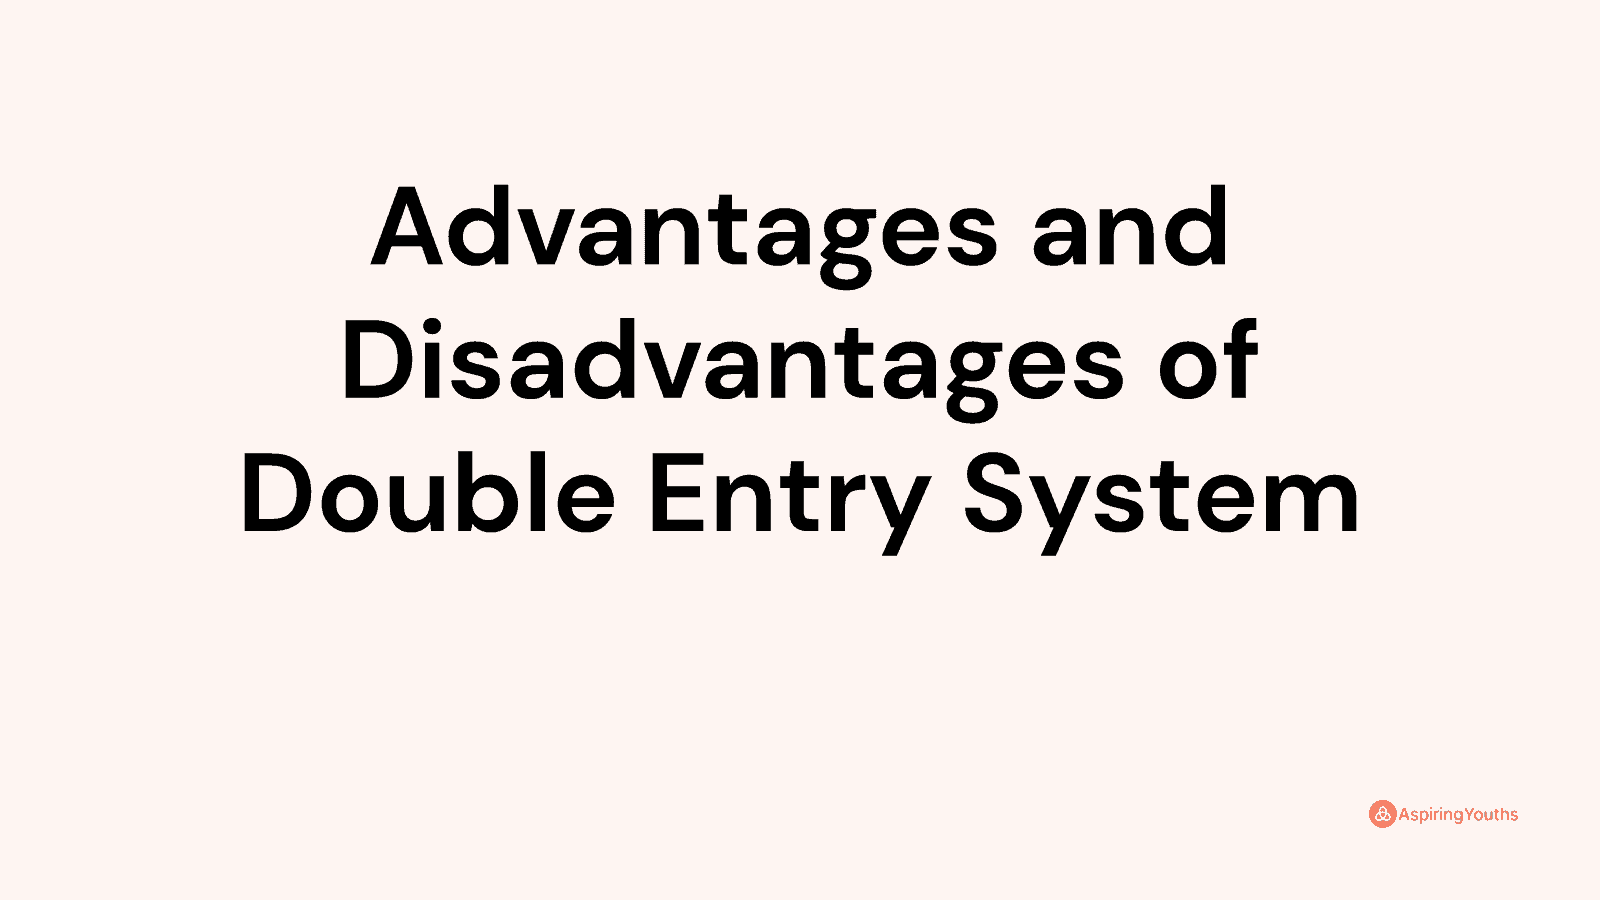 Advantages and disadvantages of Double Entry System